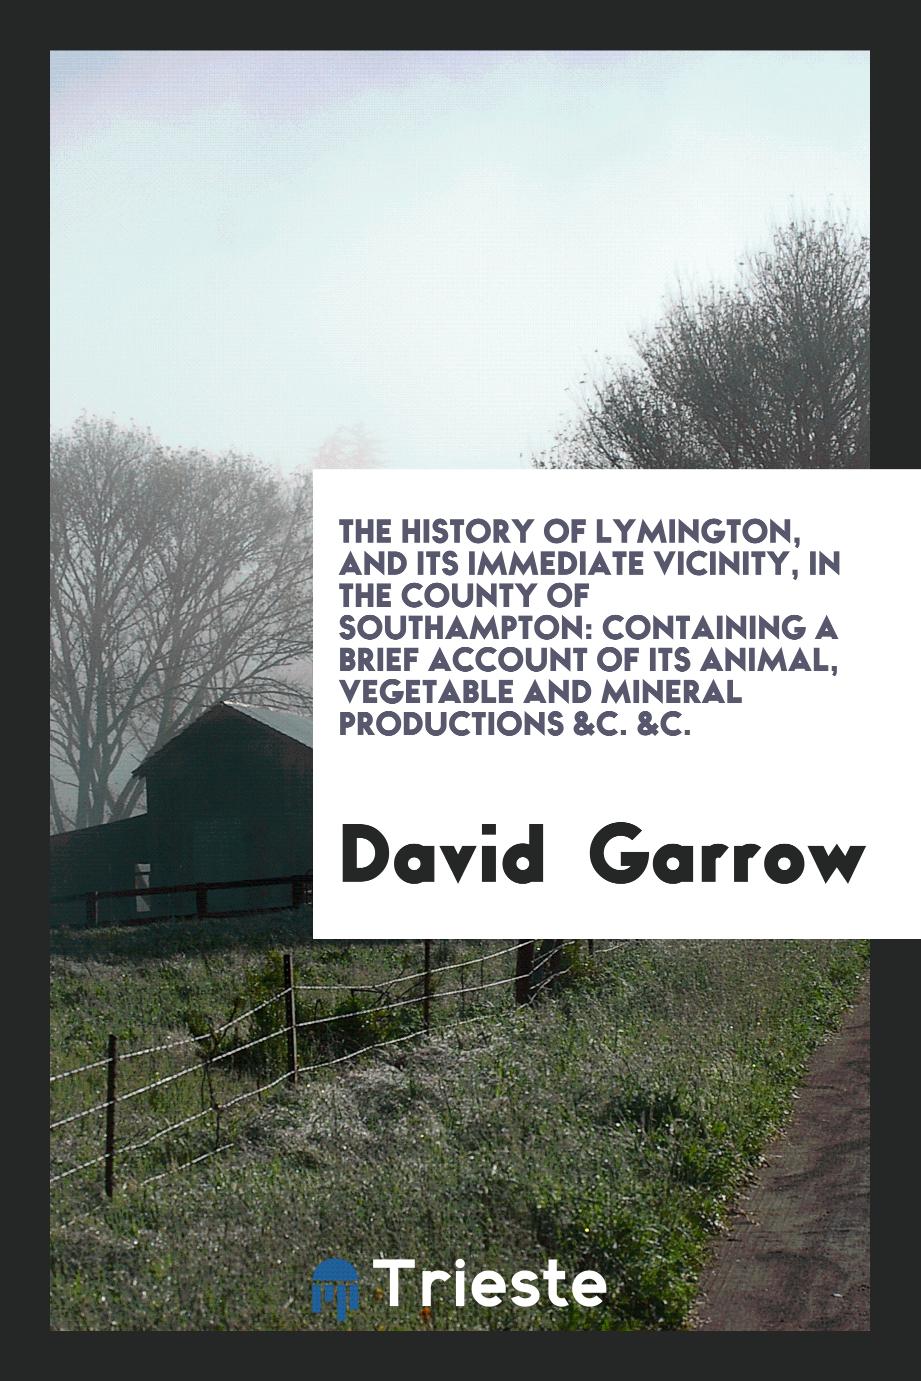 The History of Lymington, and Its Immediate Vicinity, in the County of Southampton: Containing a Brief Account of Its Animal, Vegetable and Mineral Productions &c. &c.